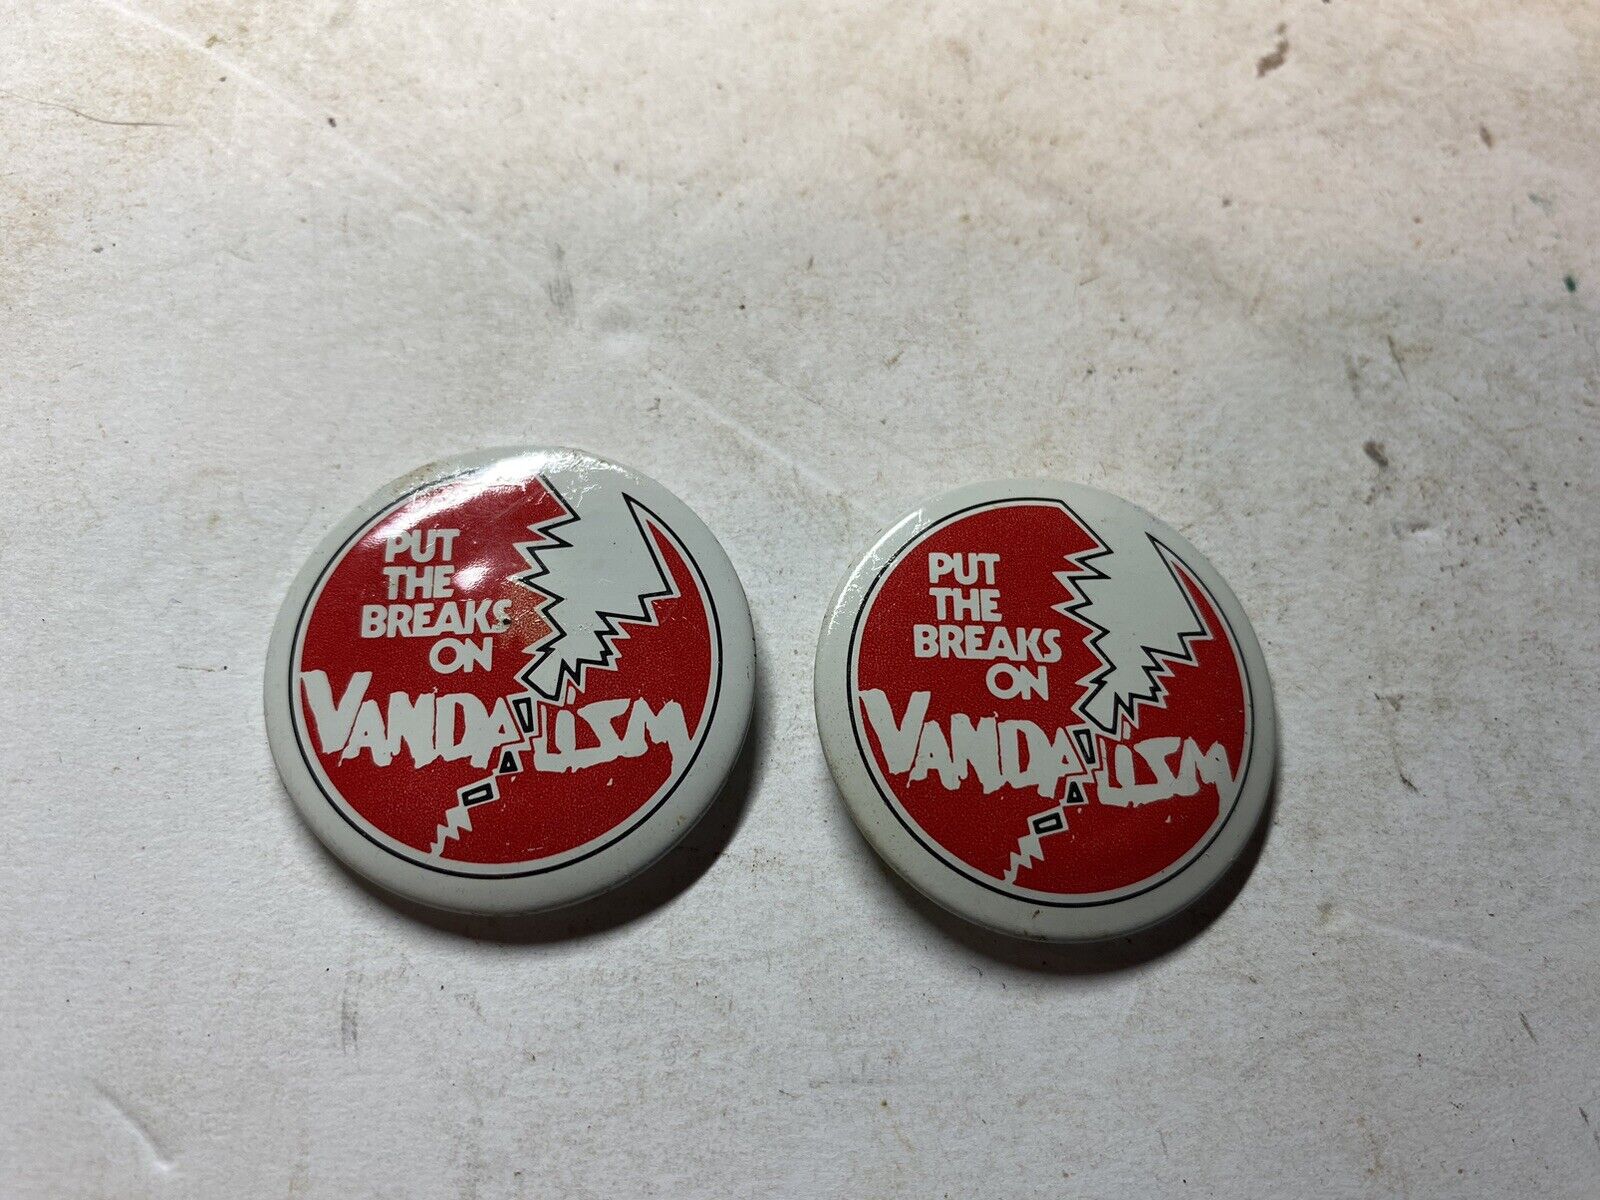 Vintage Lot Of 2 Put The Breaks On Vandalism Novelty Pinback Pin Button